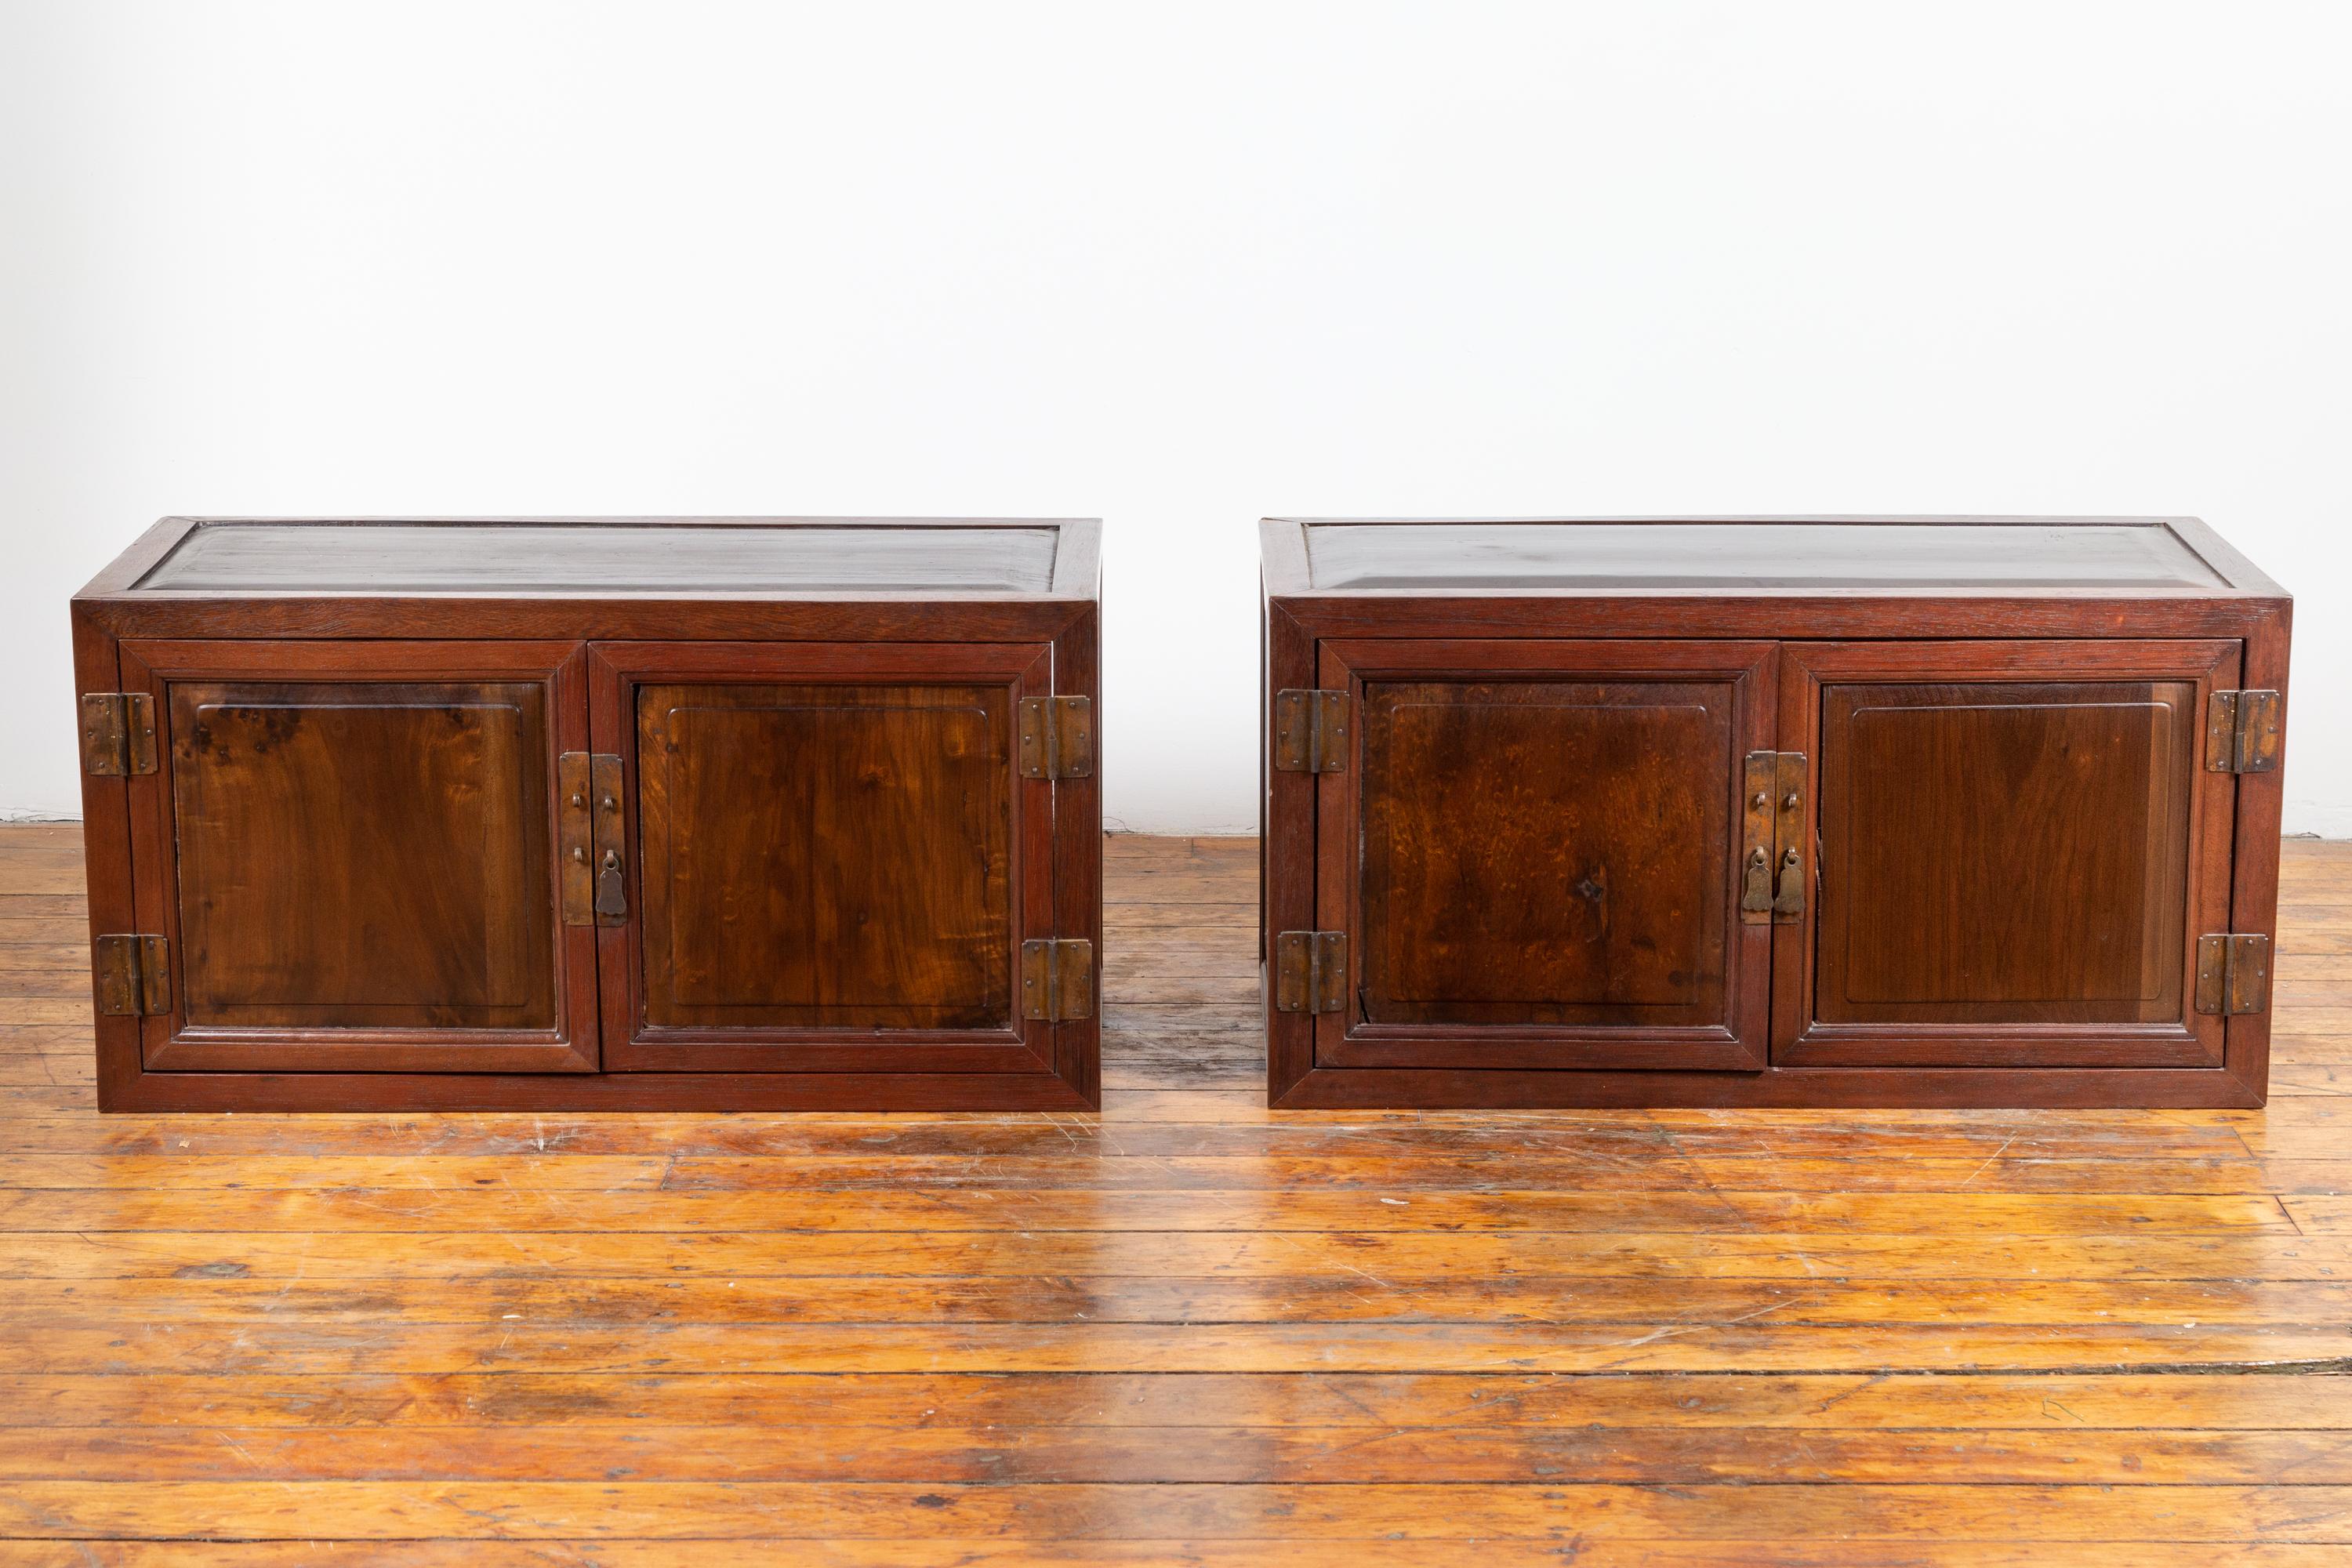 A pair of antique Chinese wooden low cabinets from the early 20th century, with brass hardware. Born in China during the early years of the 20th century, each of this pair of wooden buffets features a rectangular top with slightly raised central